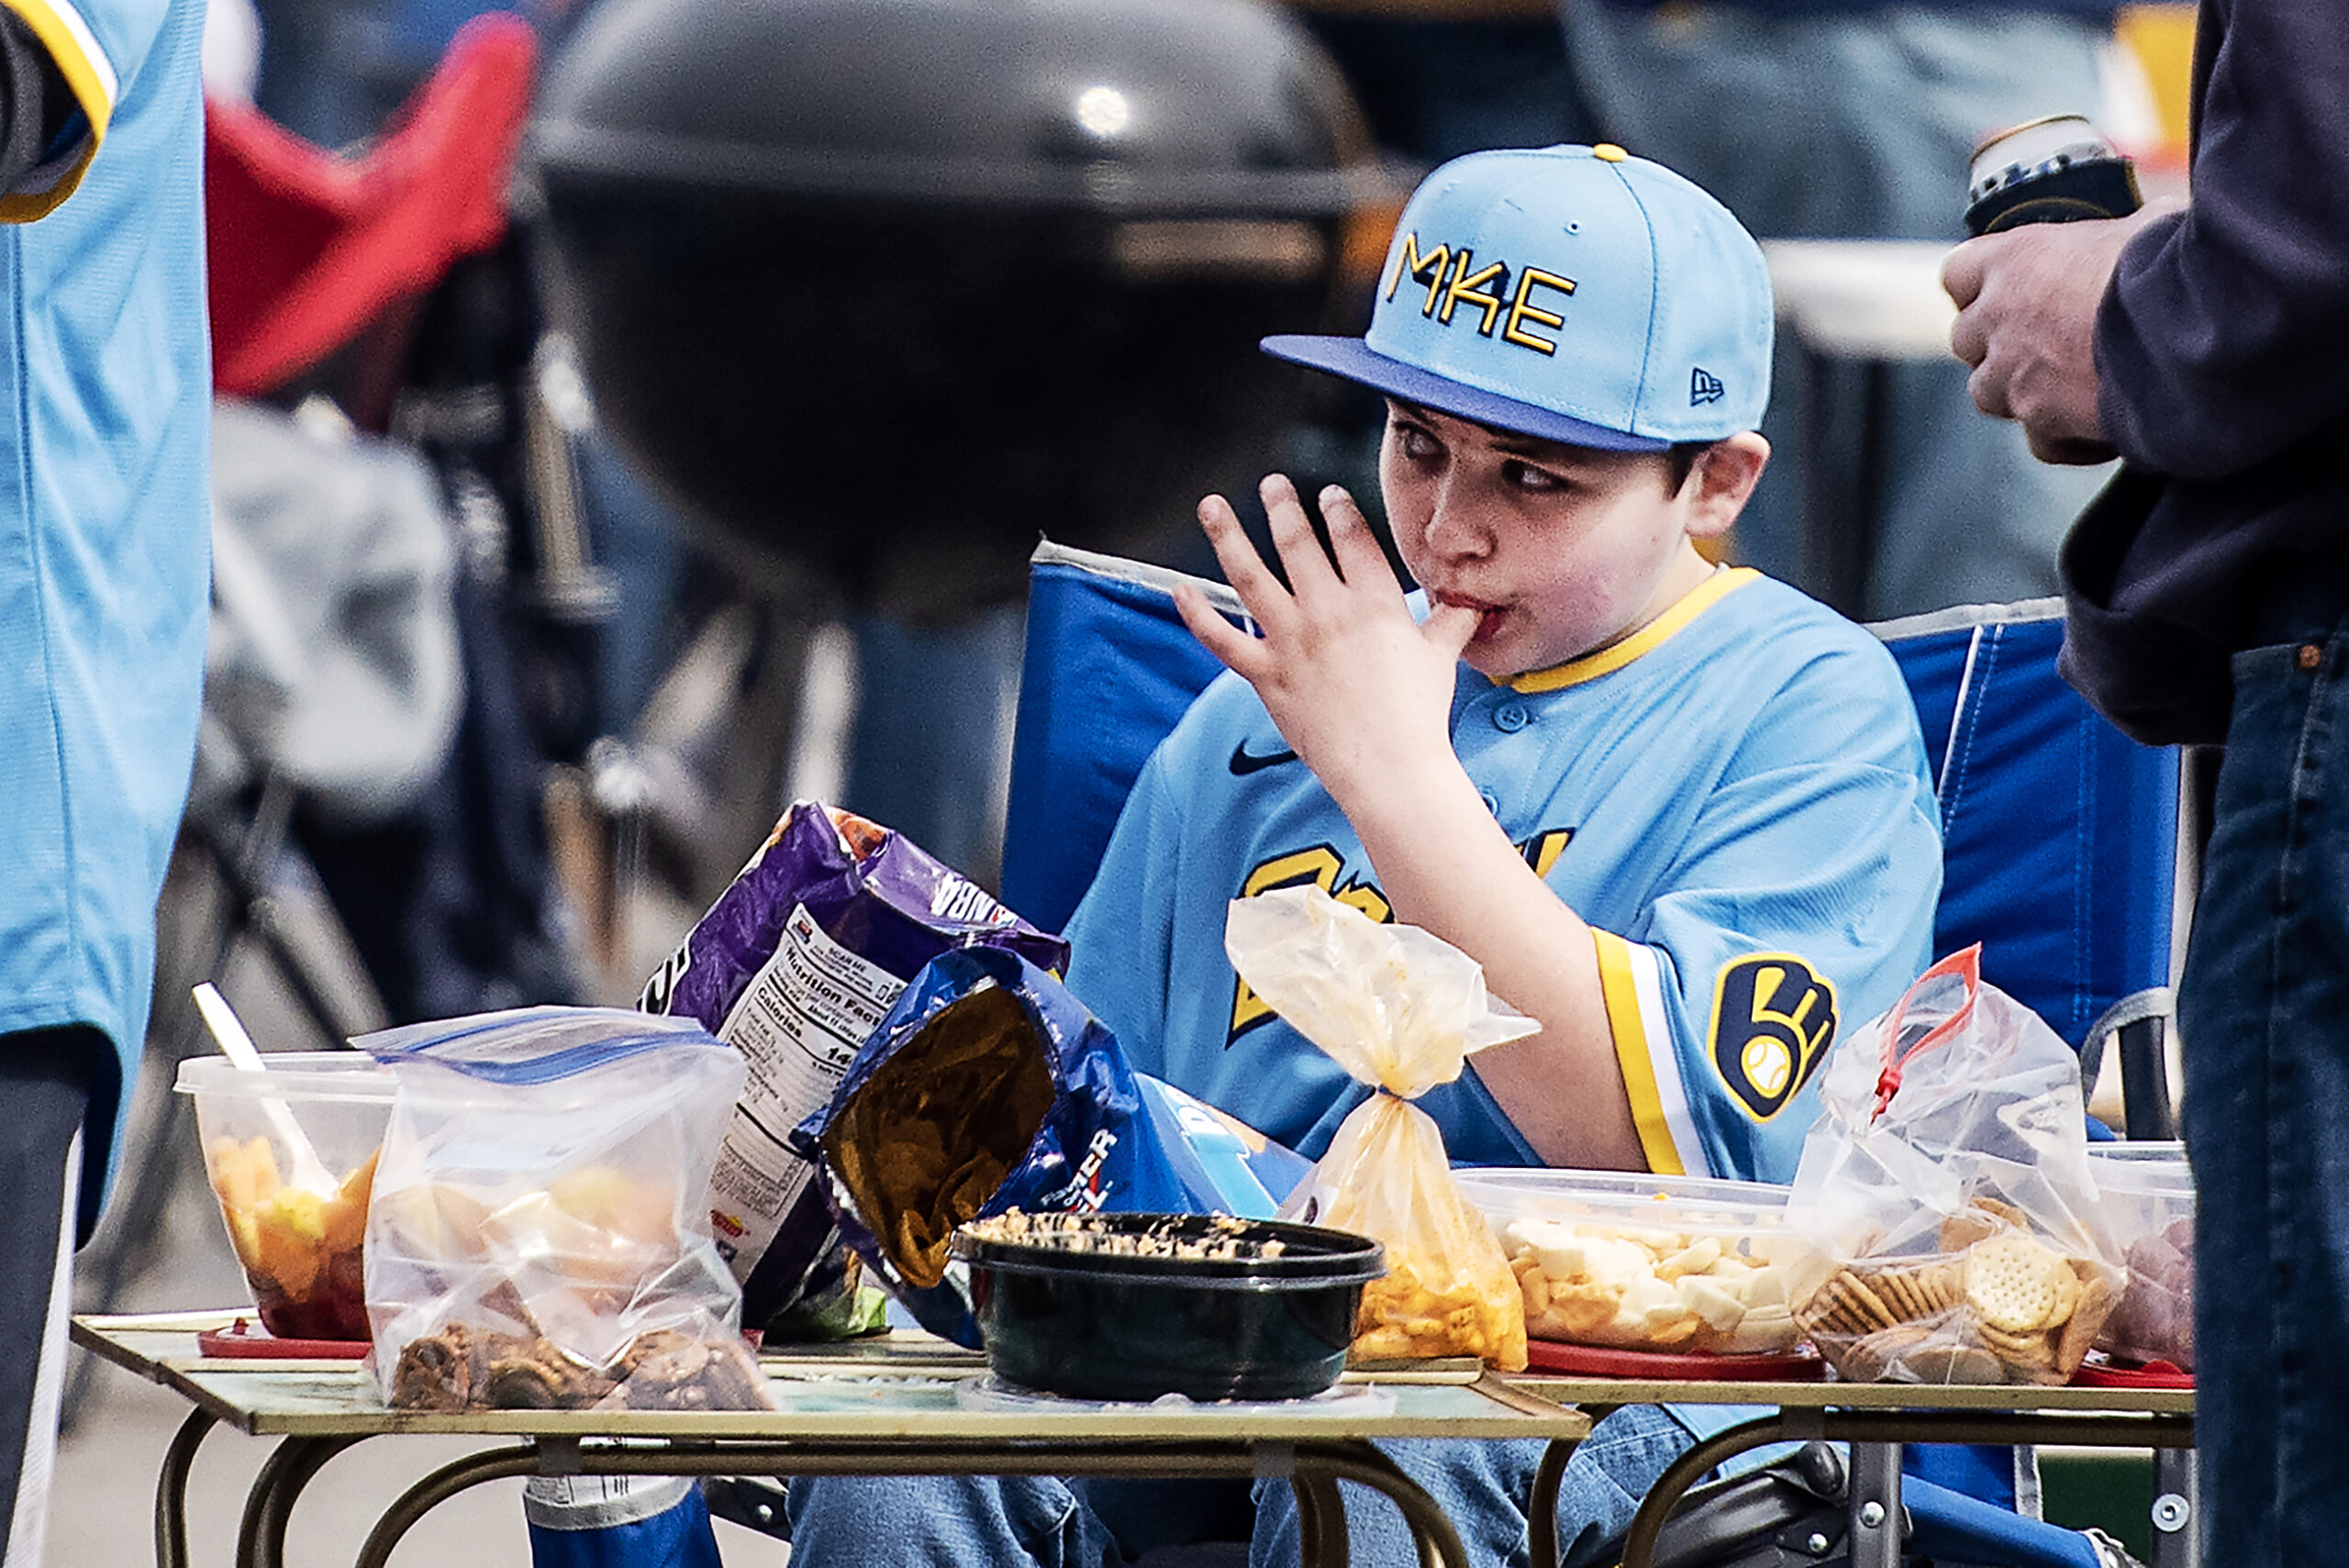 A boy in a blue Brewers jersey and baseball cap licks his fingers while eating tailgate snacks.